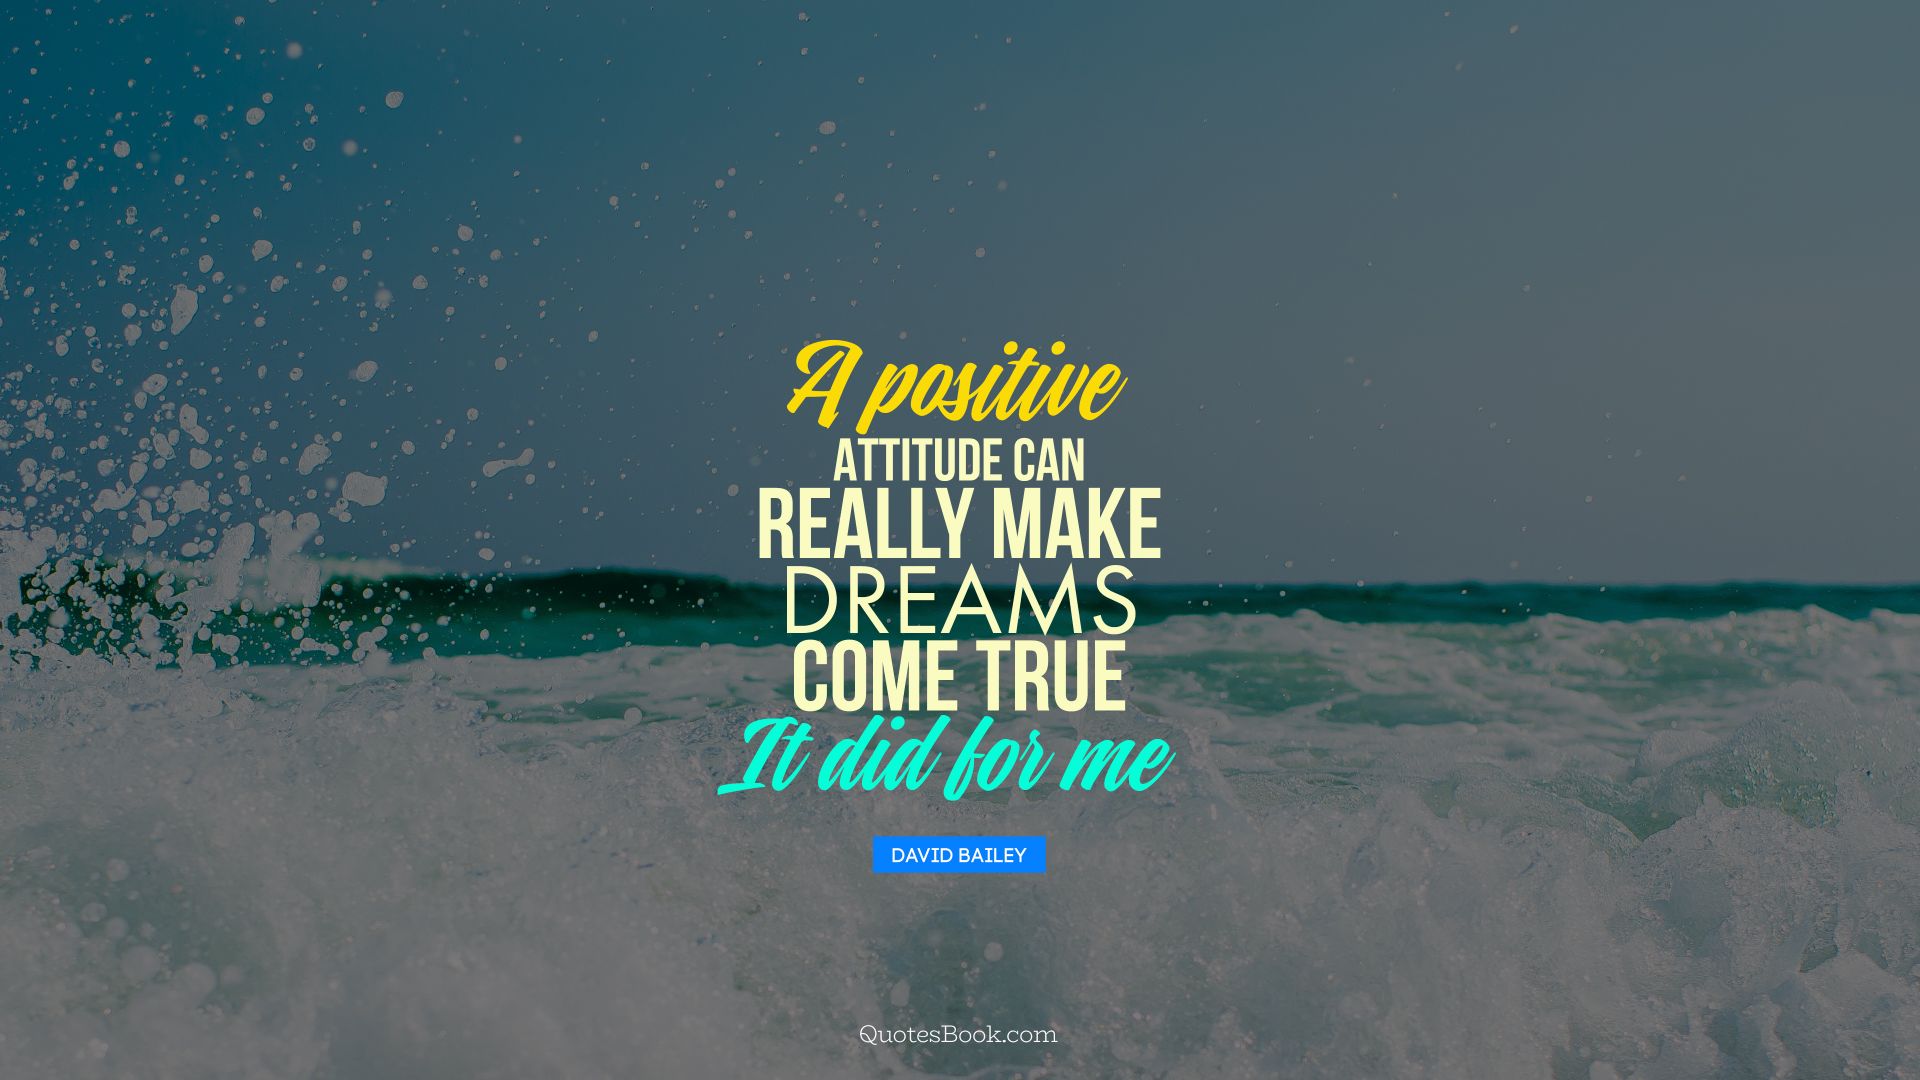 A positive attitude can really make dreams come true - it did for me. - Quote by David Bailey